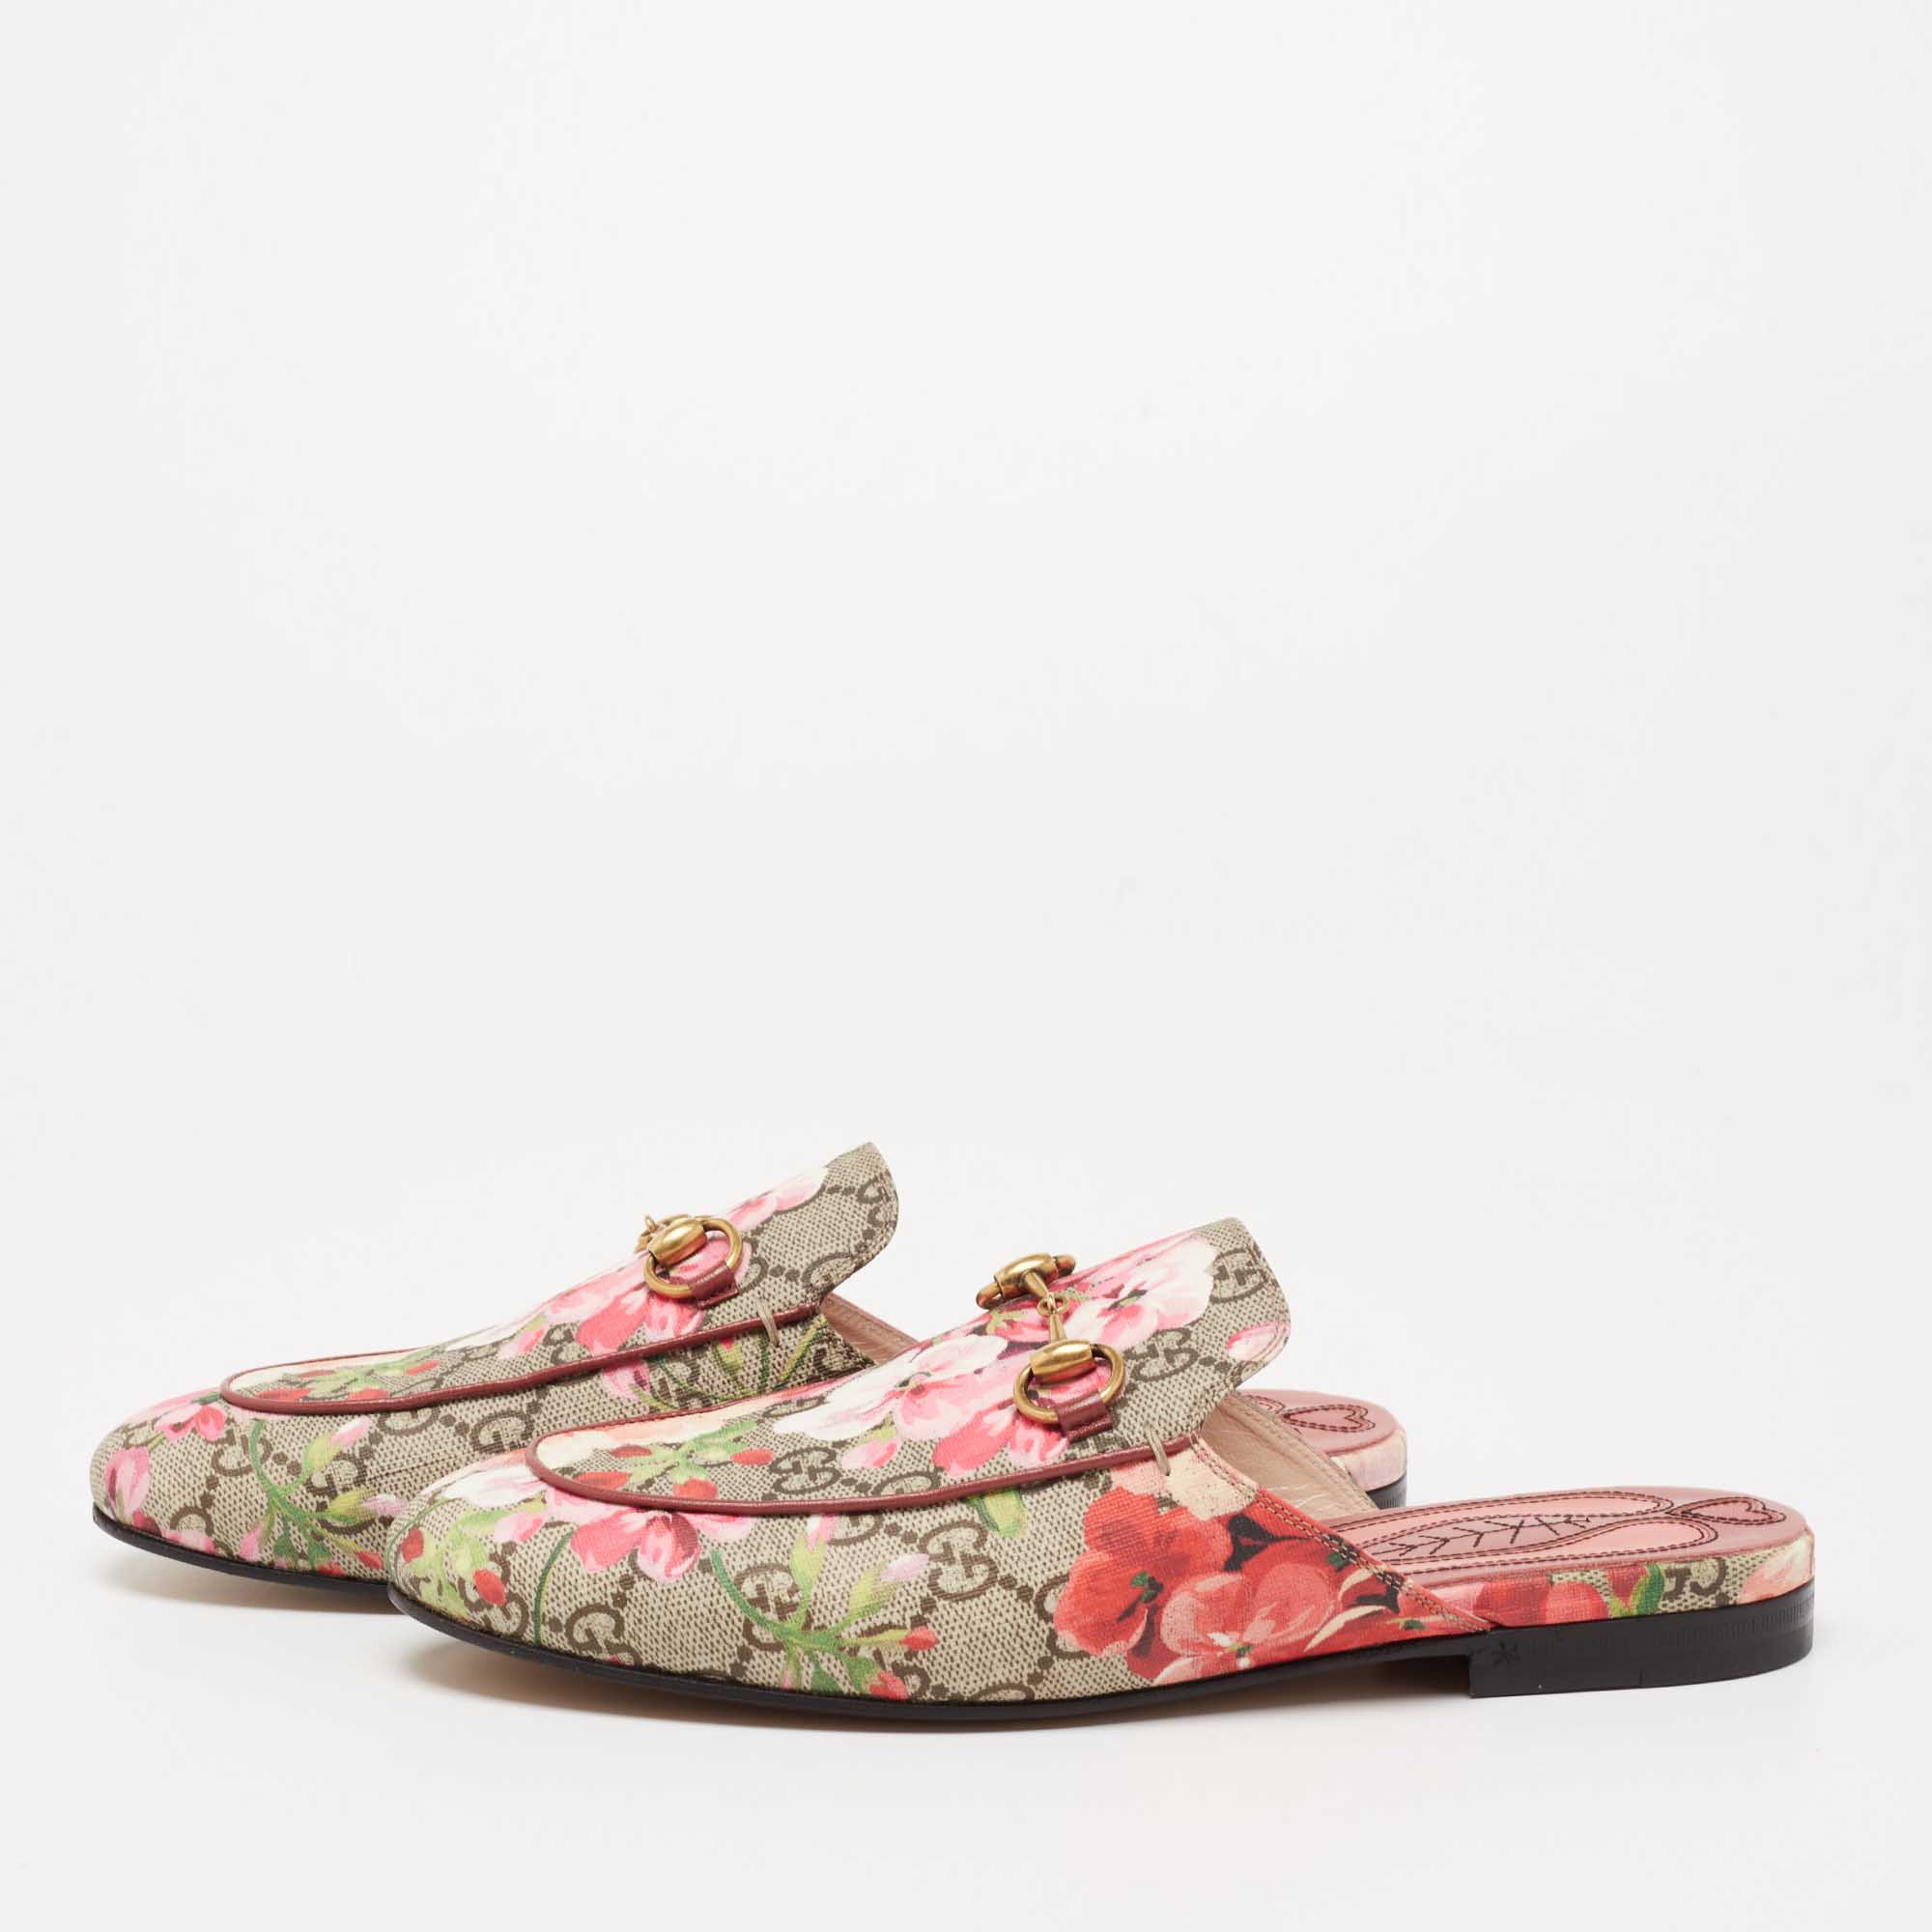 

Gucci Beige GG Supreme Blooms Printed Canvas Horsebit Princetown Mules Size